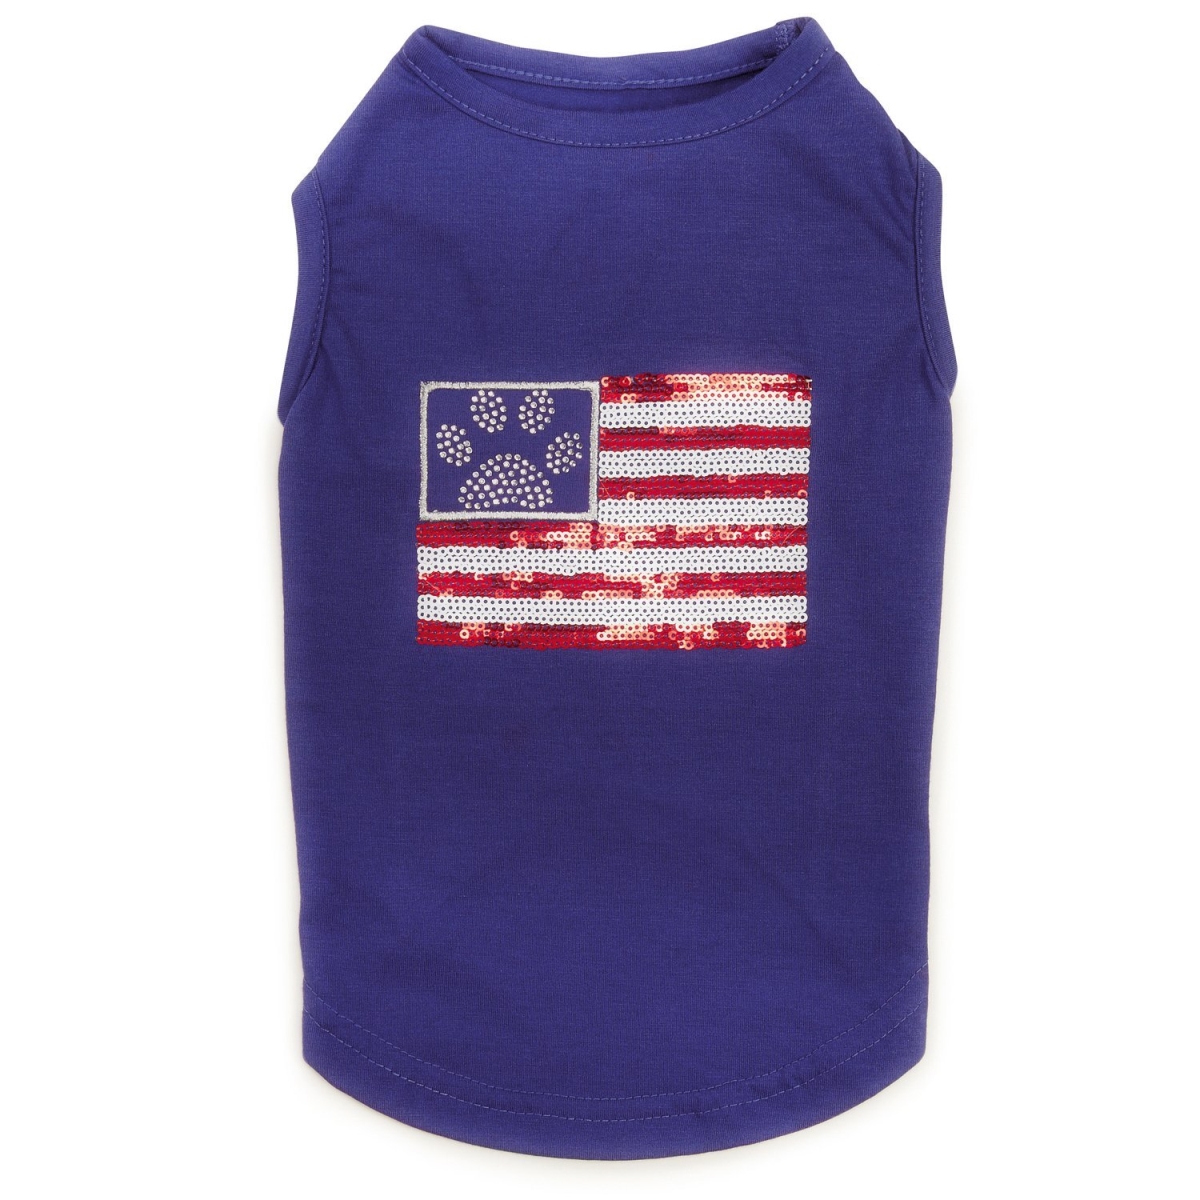 Sequin Flag Upf40 Tank Top For Dogs - Blue, Extra Small